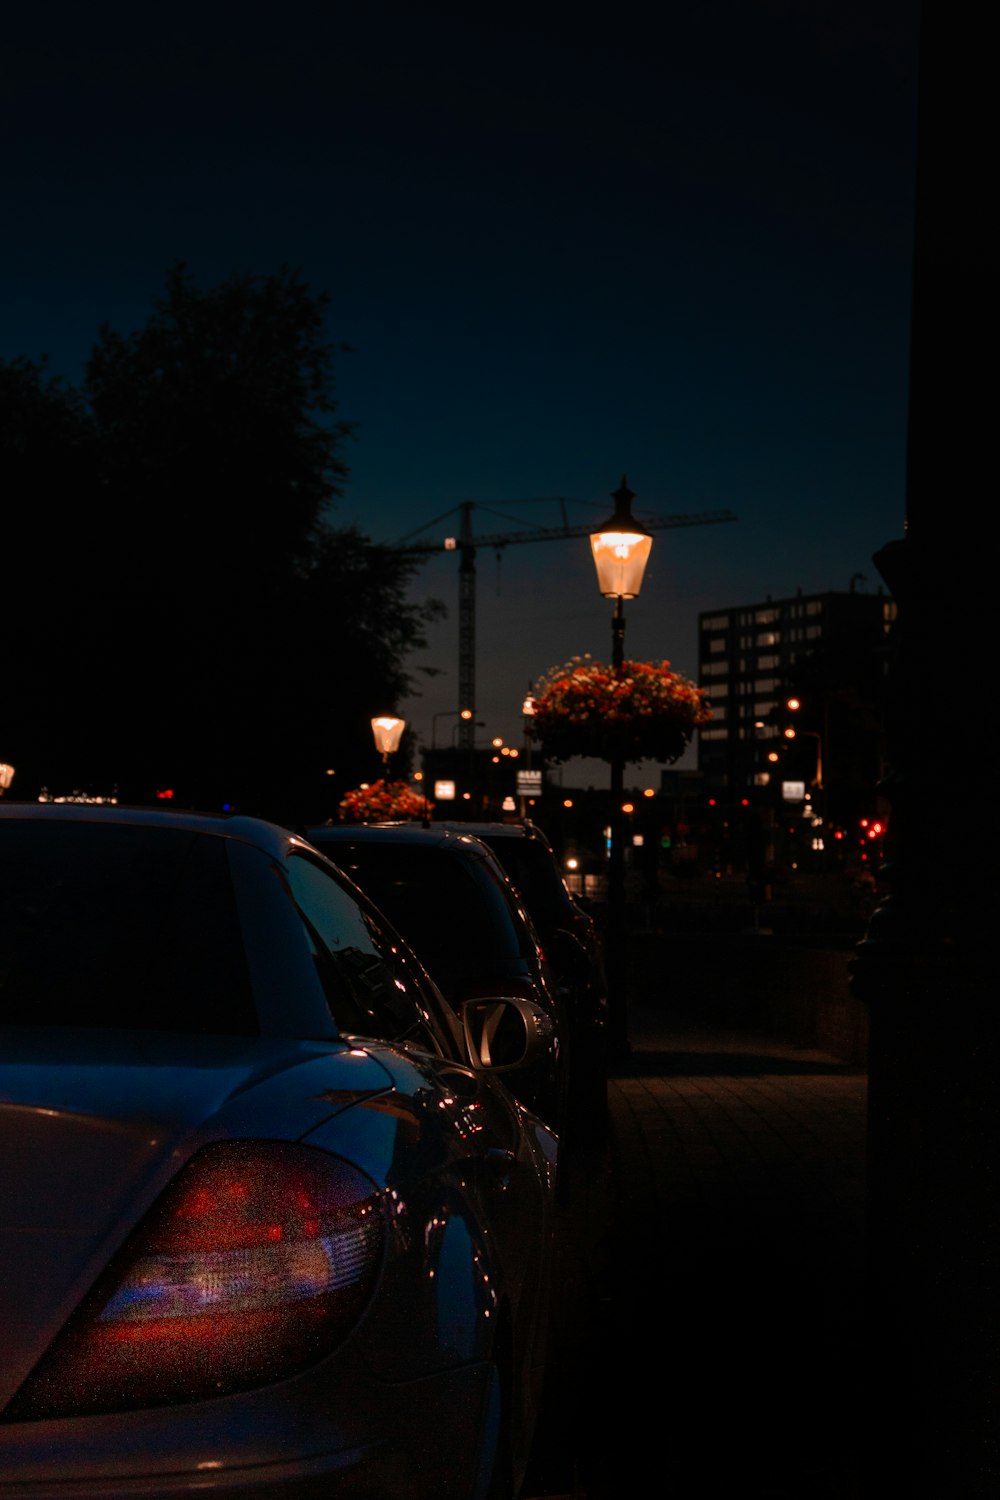 vehicles park at the side of the street during nighttime